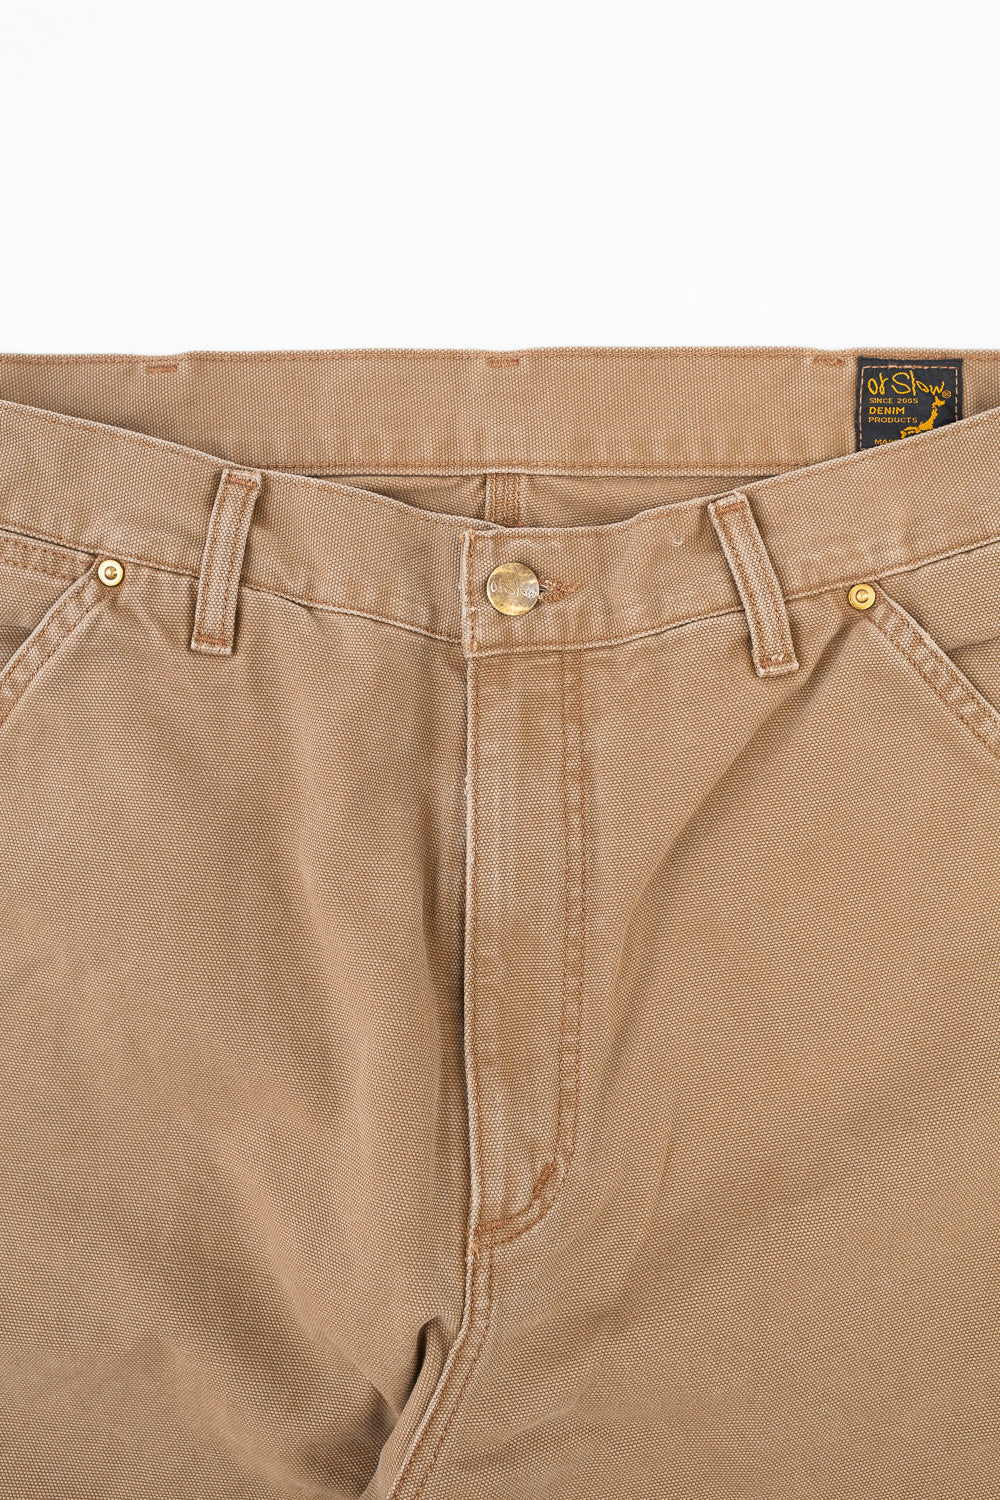 01-5228-53 - Painters Pants Duck Canvas Relax Fit - Brown